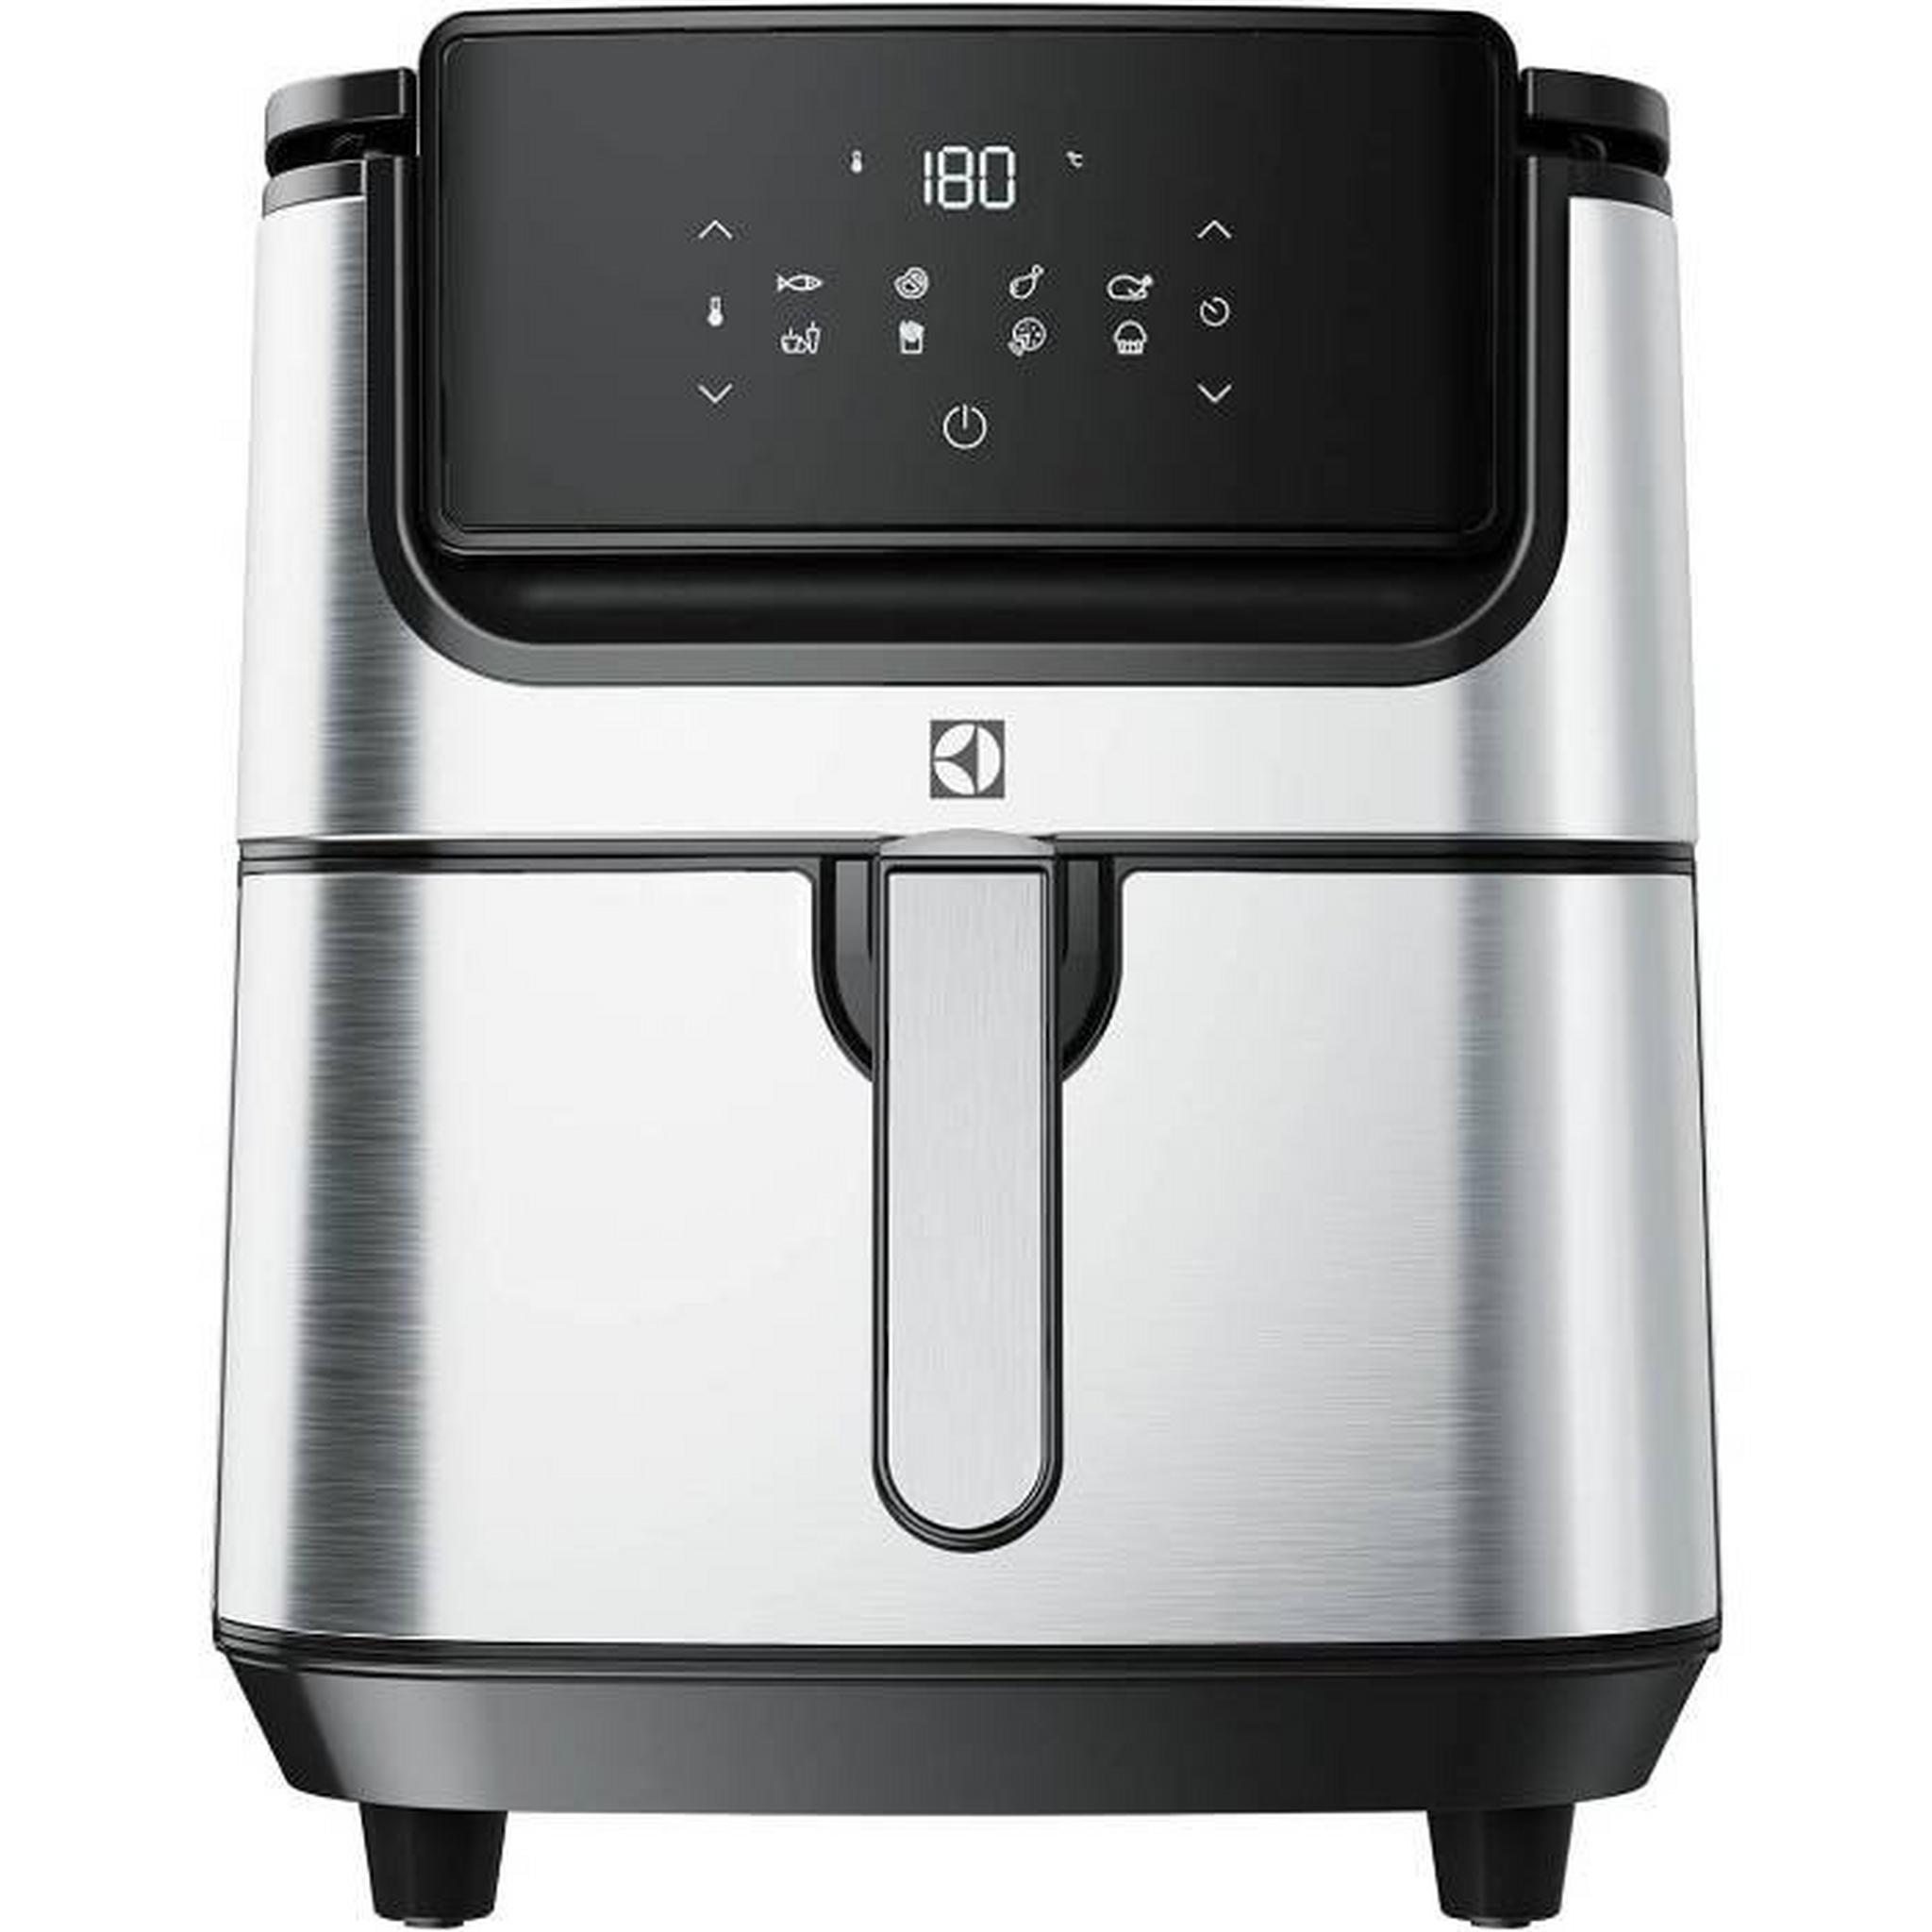 Electrolux Air Fryer, 5.4L, E6AF1-720S – Stainless steel